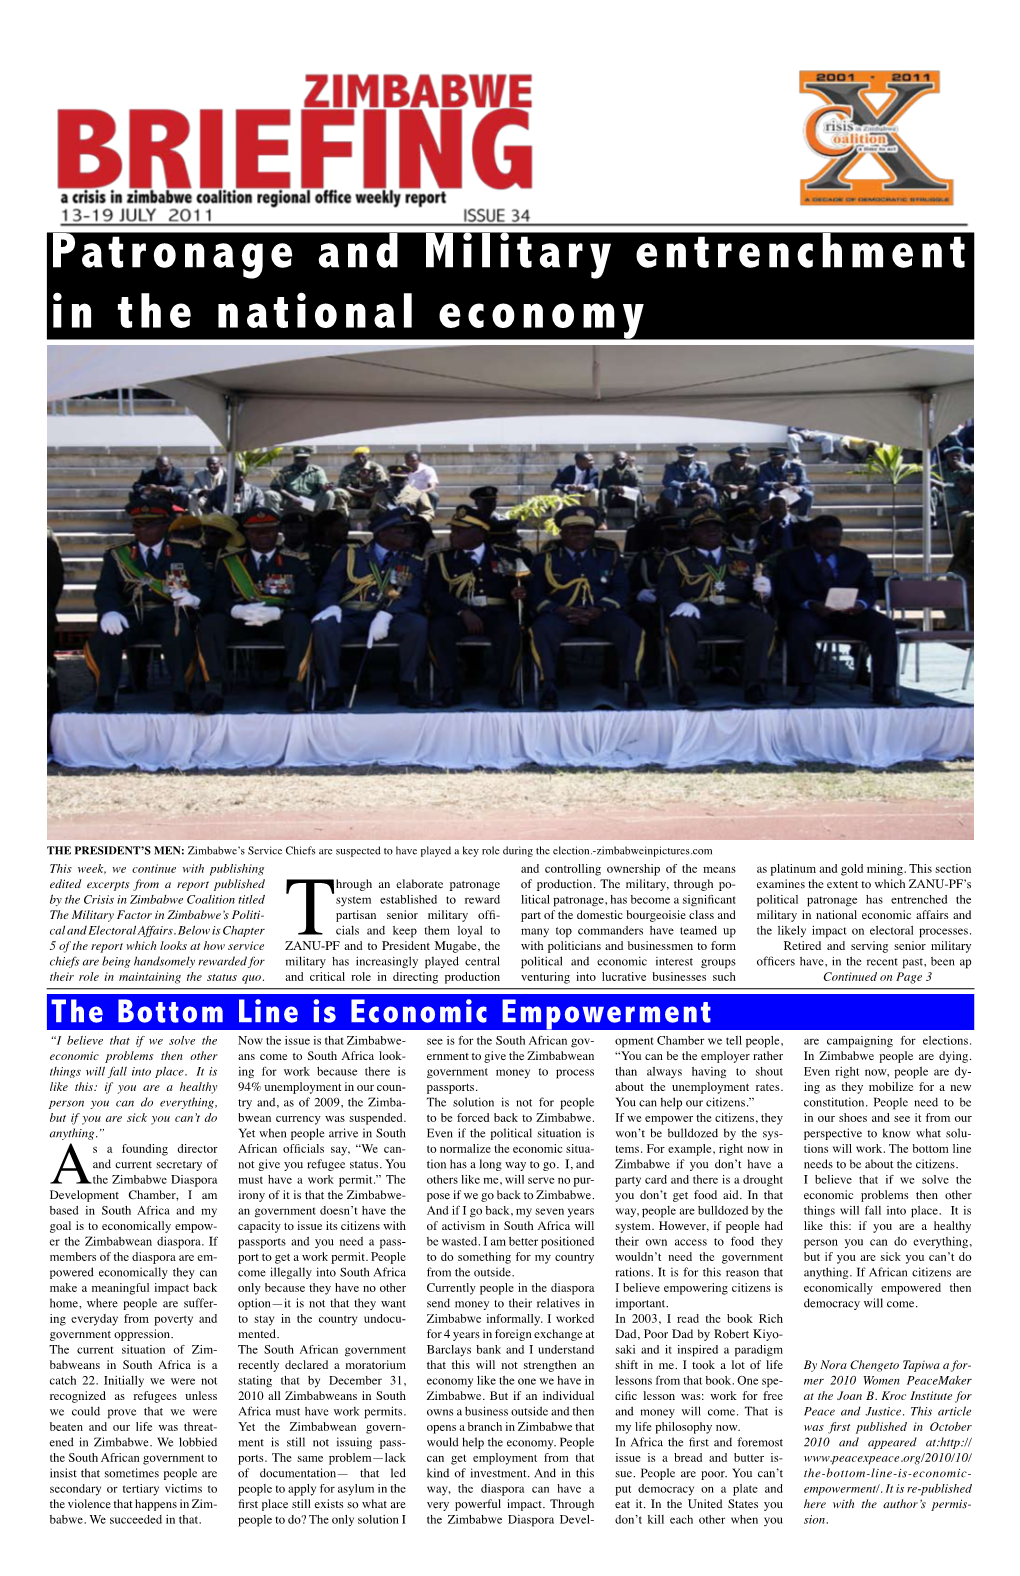 Patronage and Military Entrenchment in the National Economy